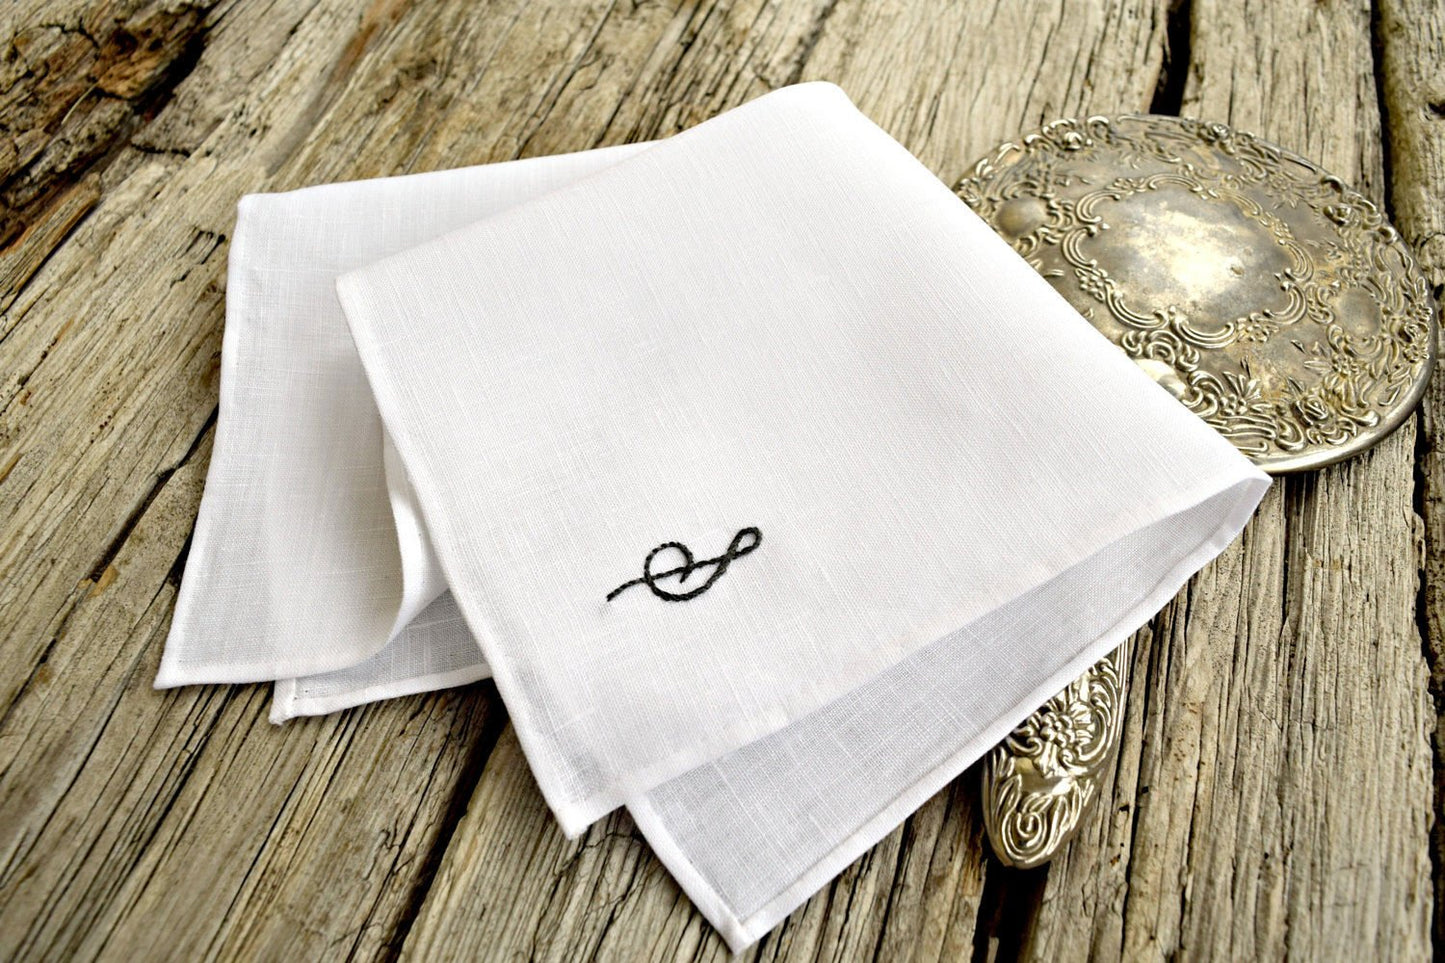 Closeup of Irish linen handkerchief showing hem detail and hand embroidered letter